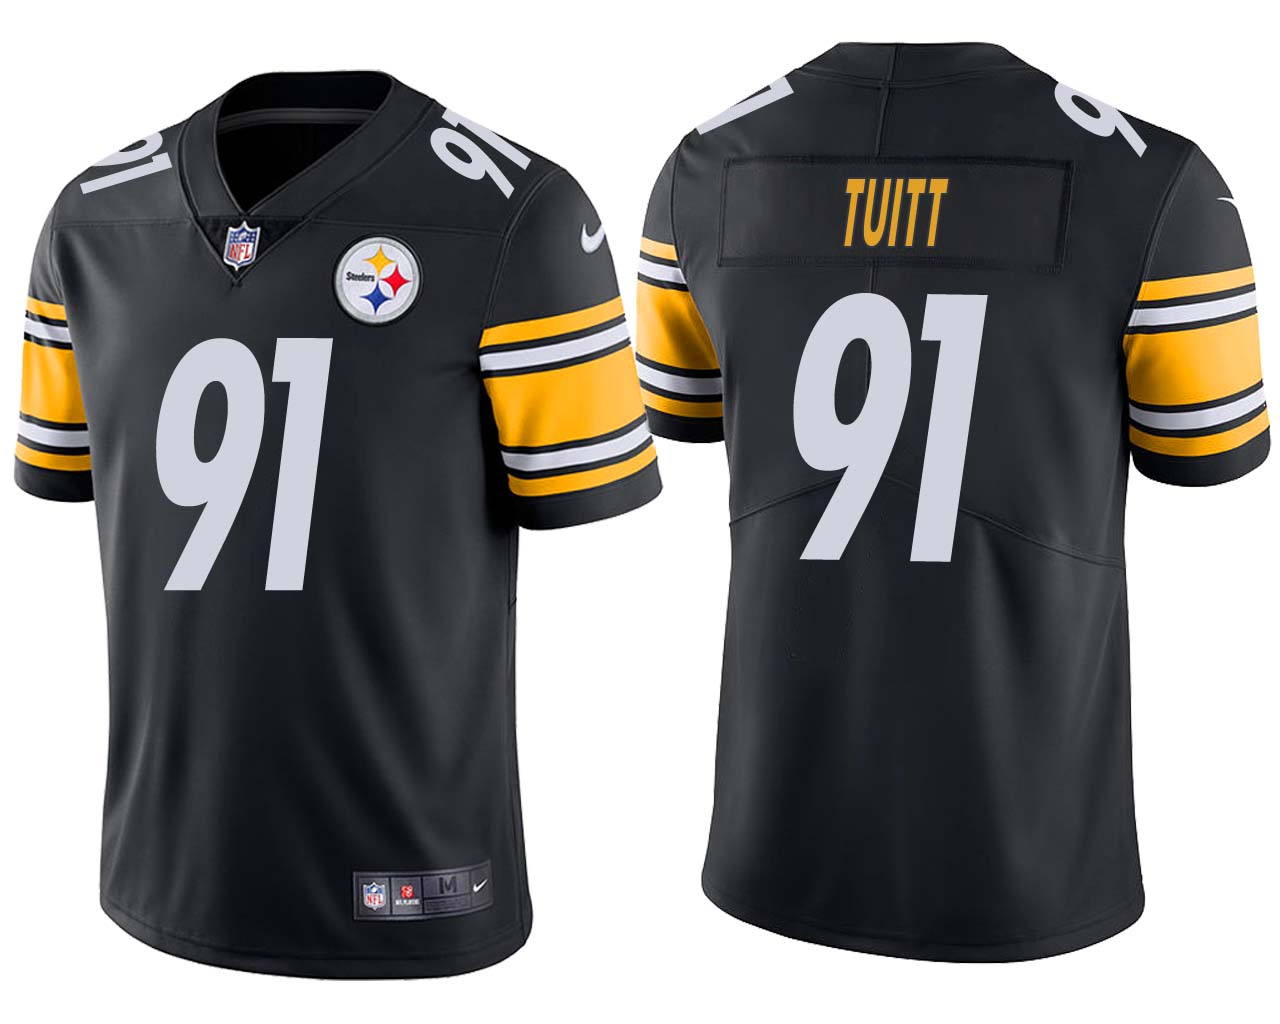 Men's Pittsburgh Steelers #91 Stephon Tuitt Black Vapor Untouchable Limited Stitched Jersey